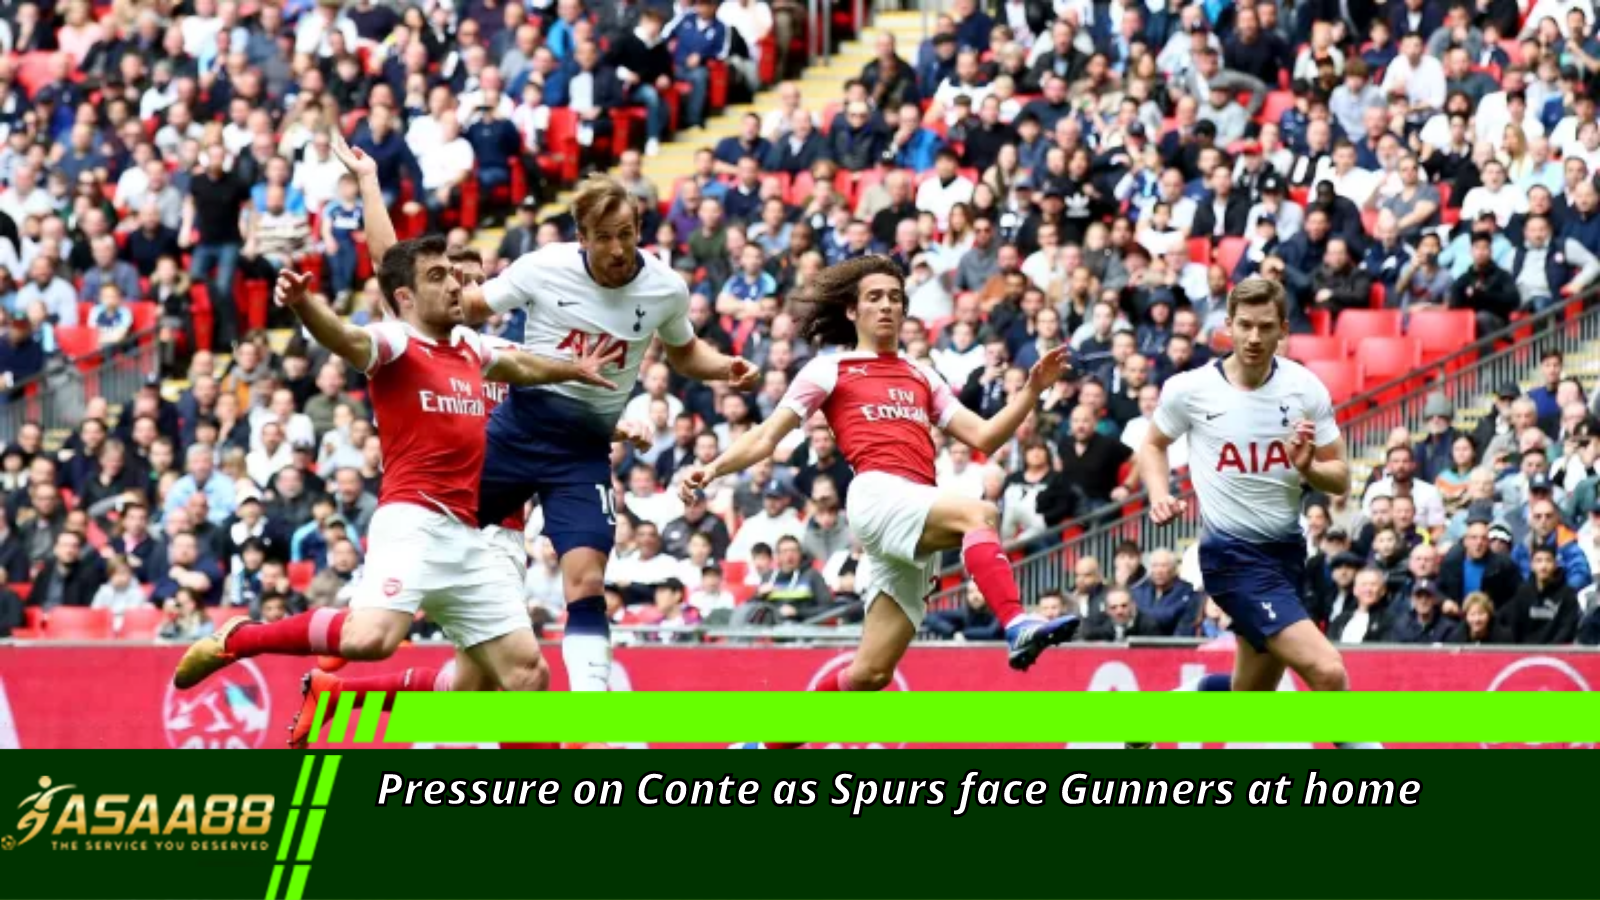 Pressure on Conte as Spurs face Gunners at home